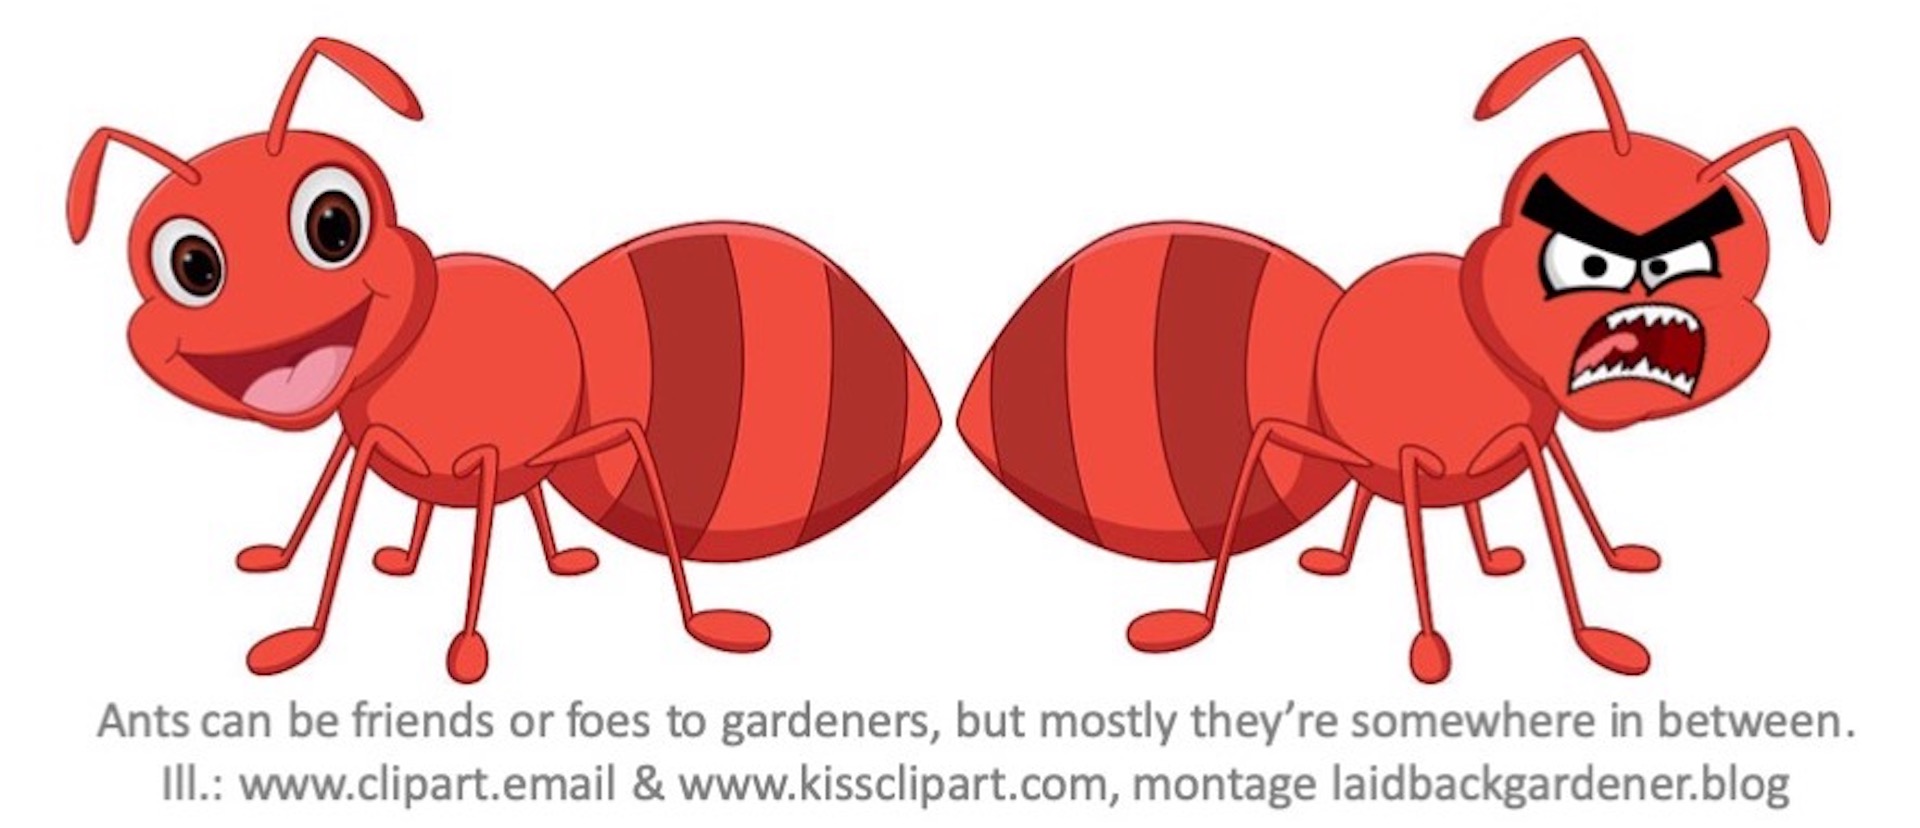 Illustration showing a good ant and a bad ant.